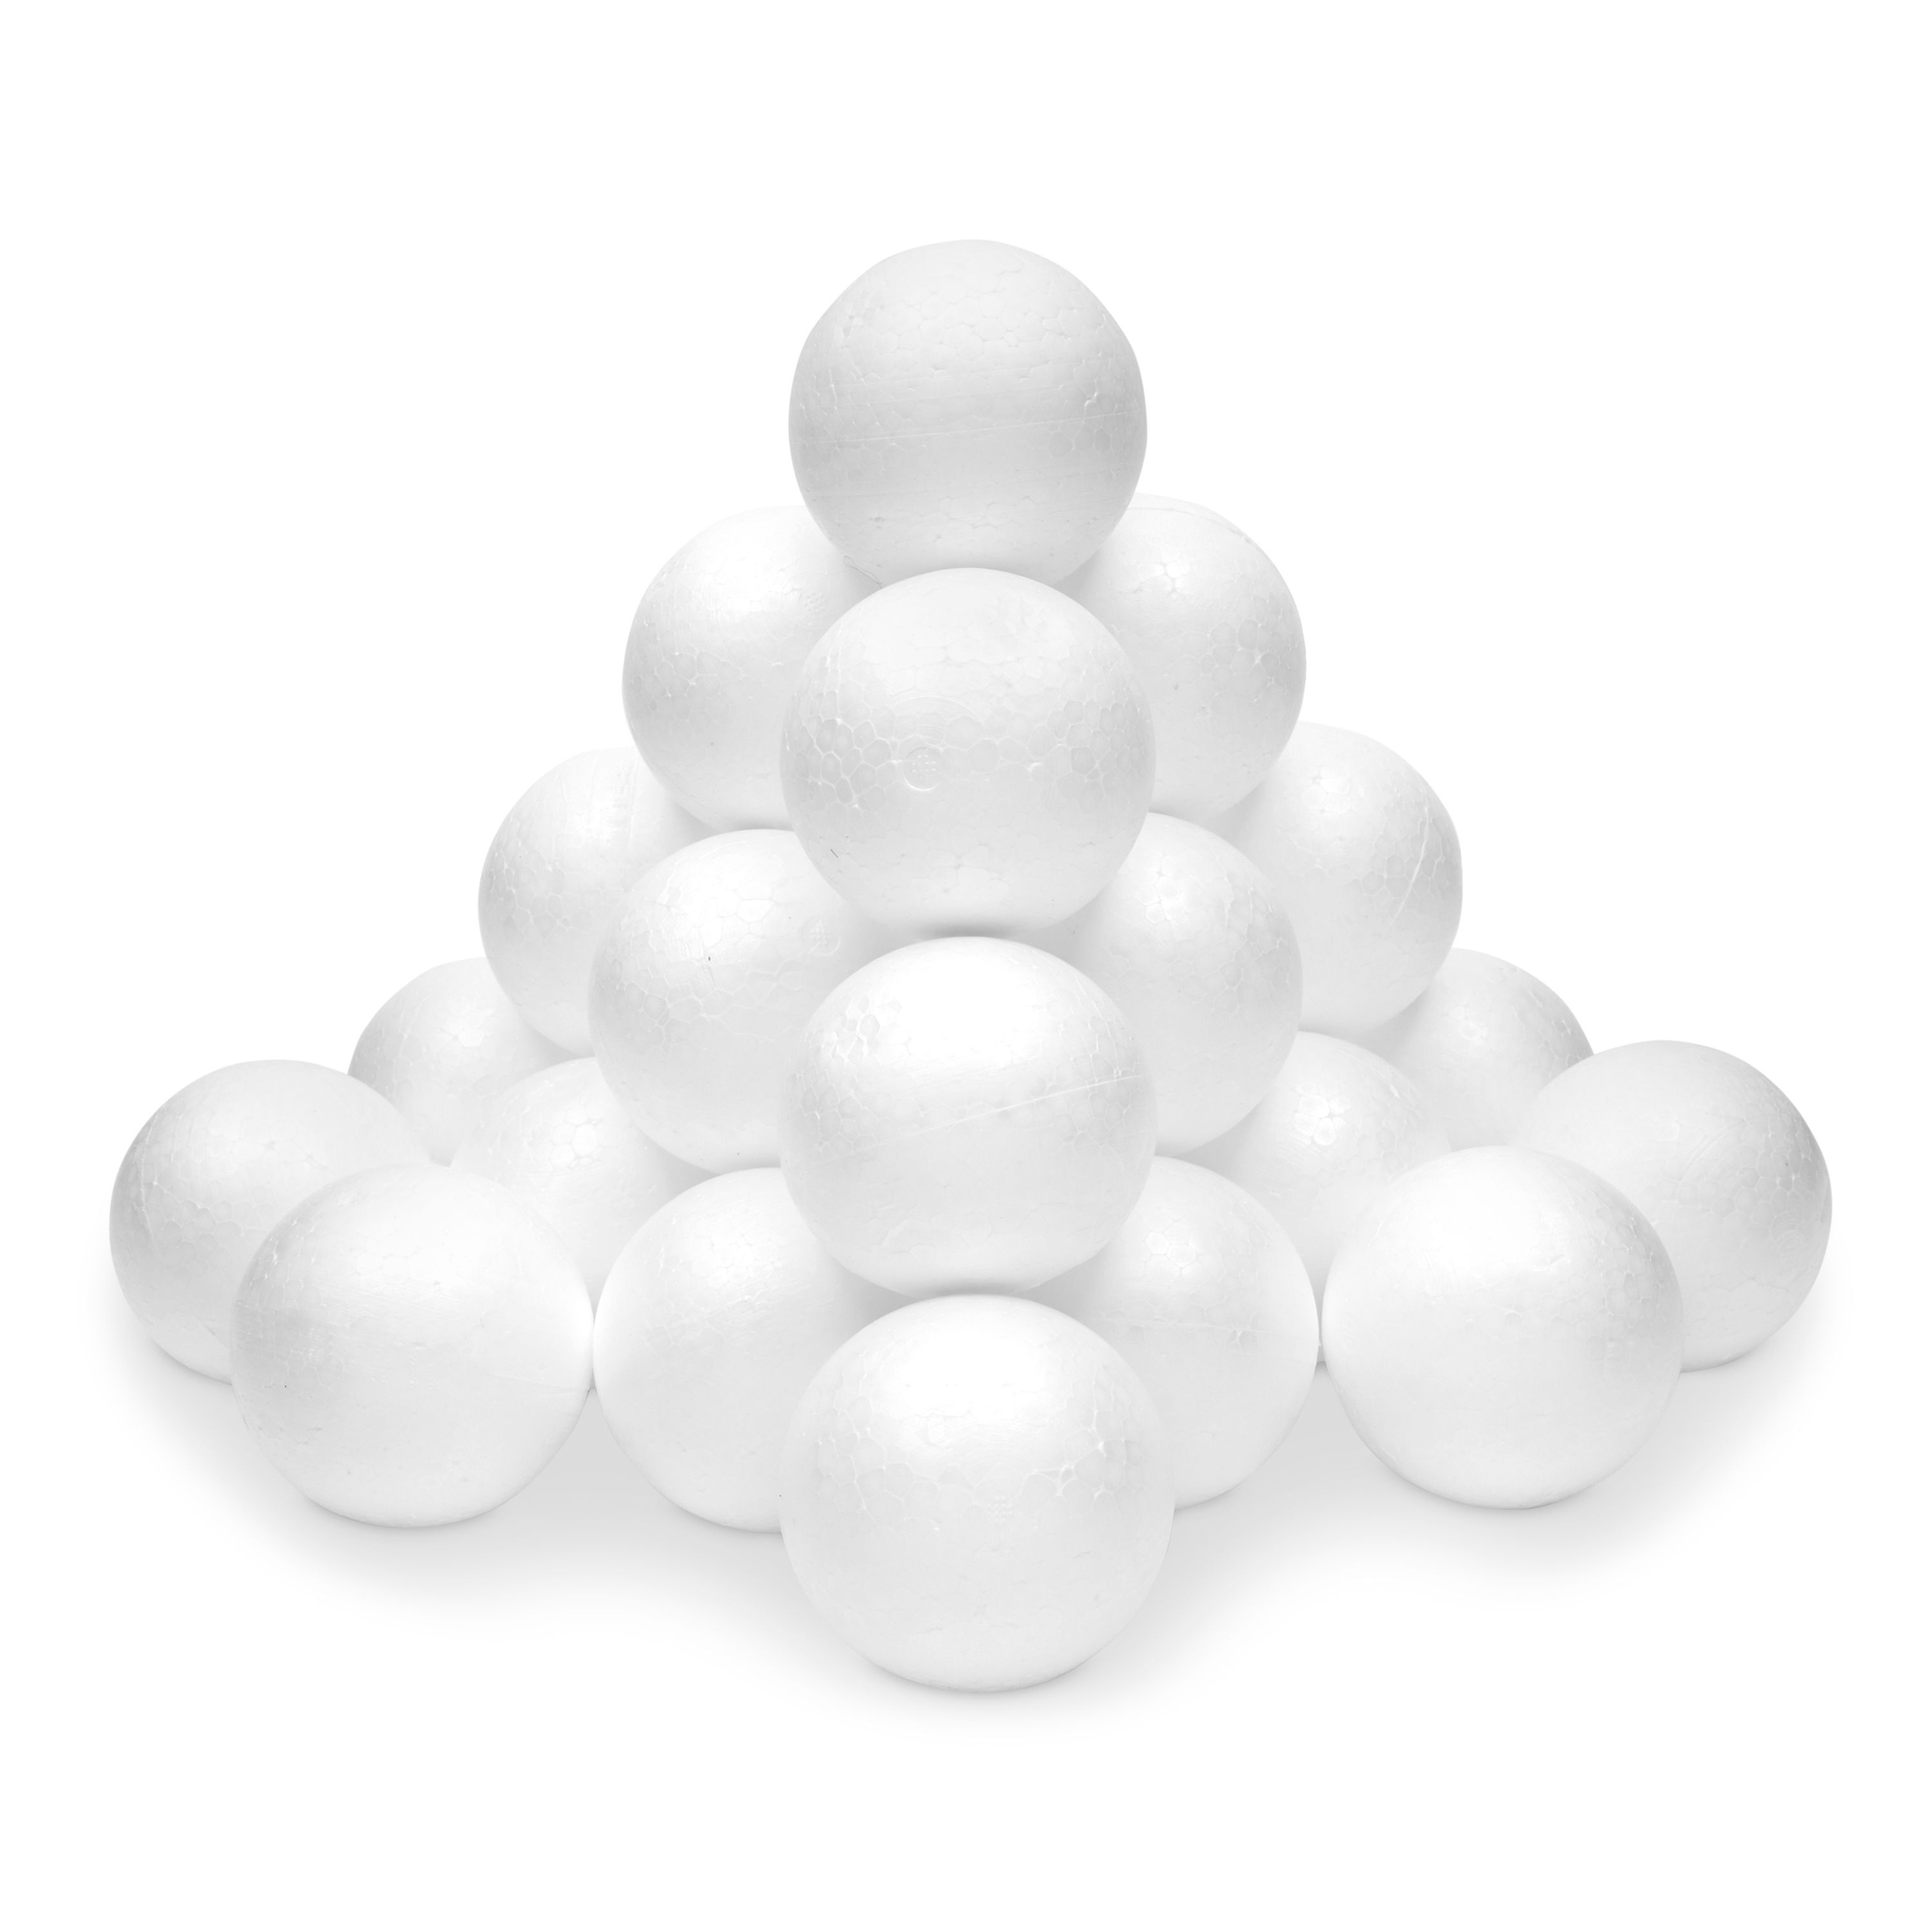 24 Pack 3 Inch Foam Balls for Crafts, Smooth Polystyrene Spheres